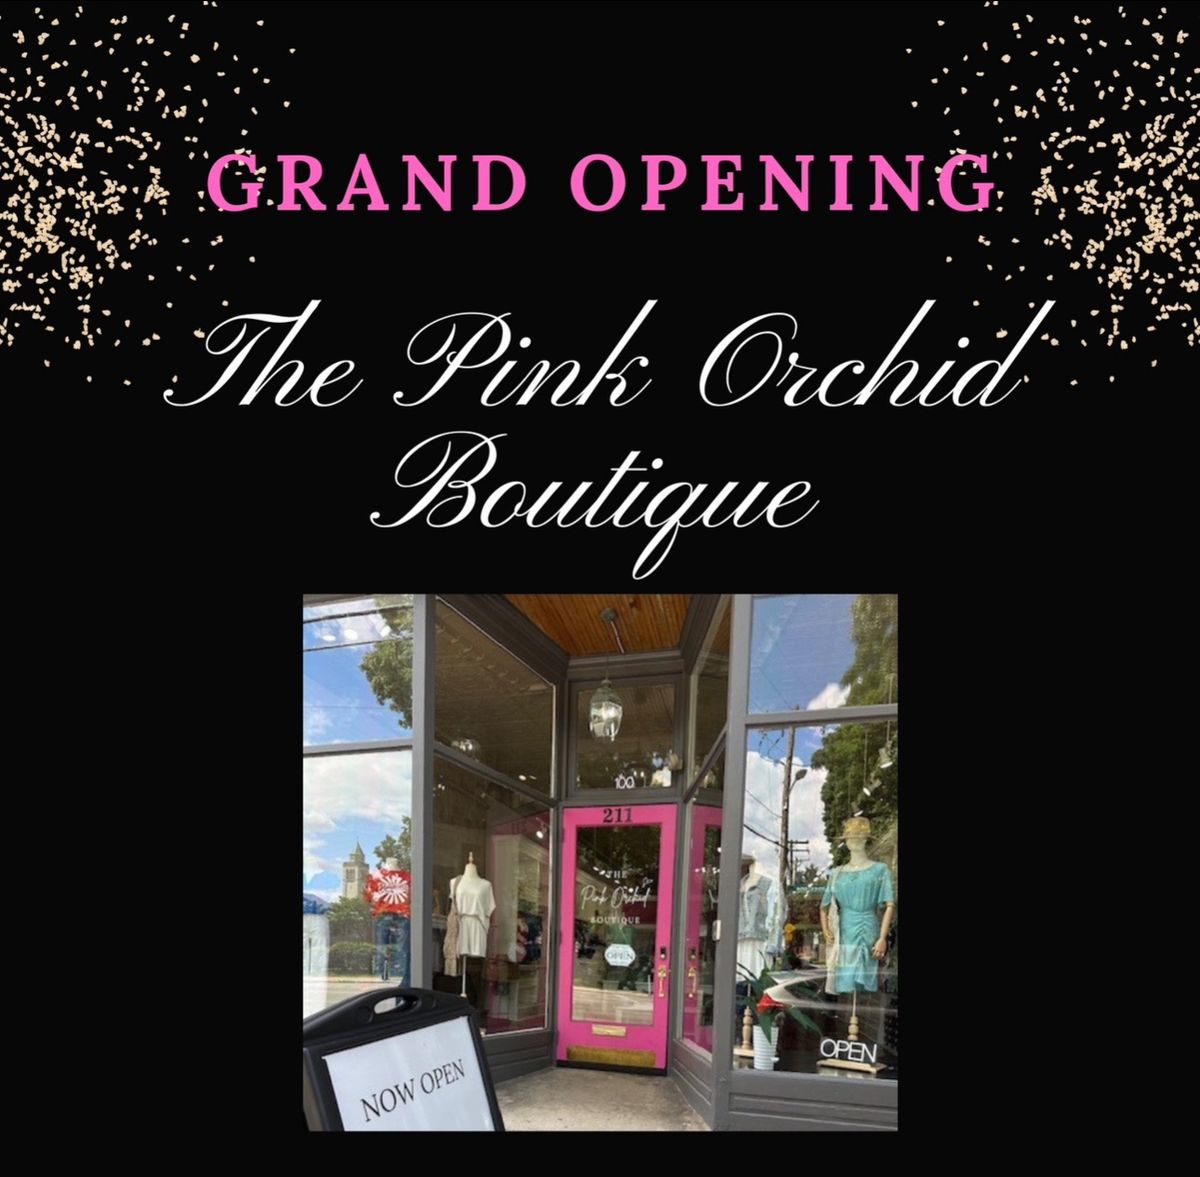 Grand Opening of The Pink Orchid Boutique 